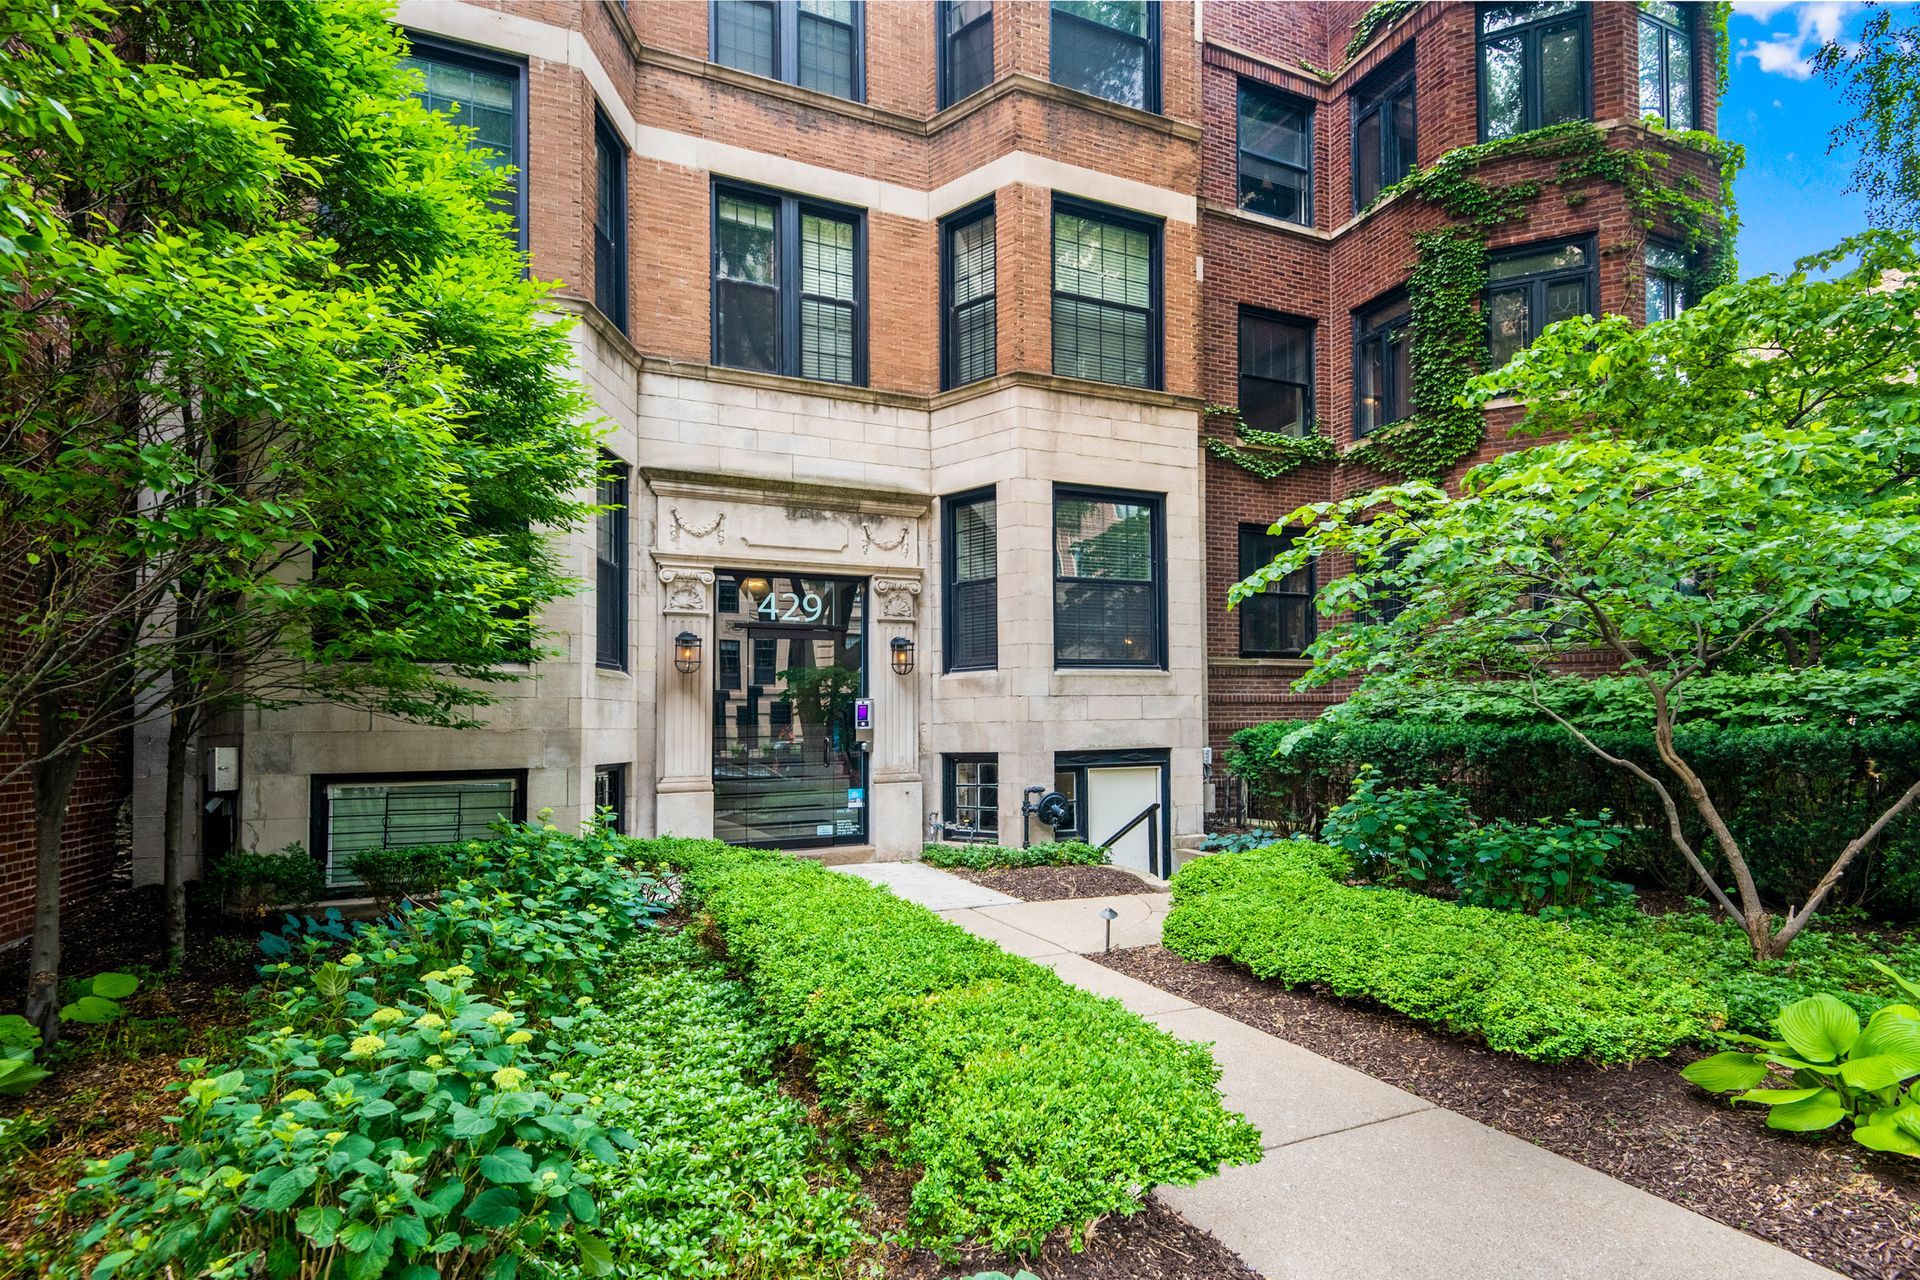 A large brick apartment building with a lush green garden in front of it at 429 W Melrose Street.